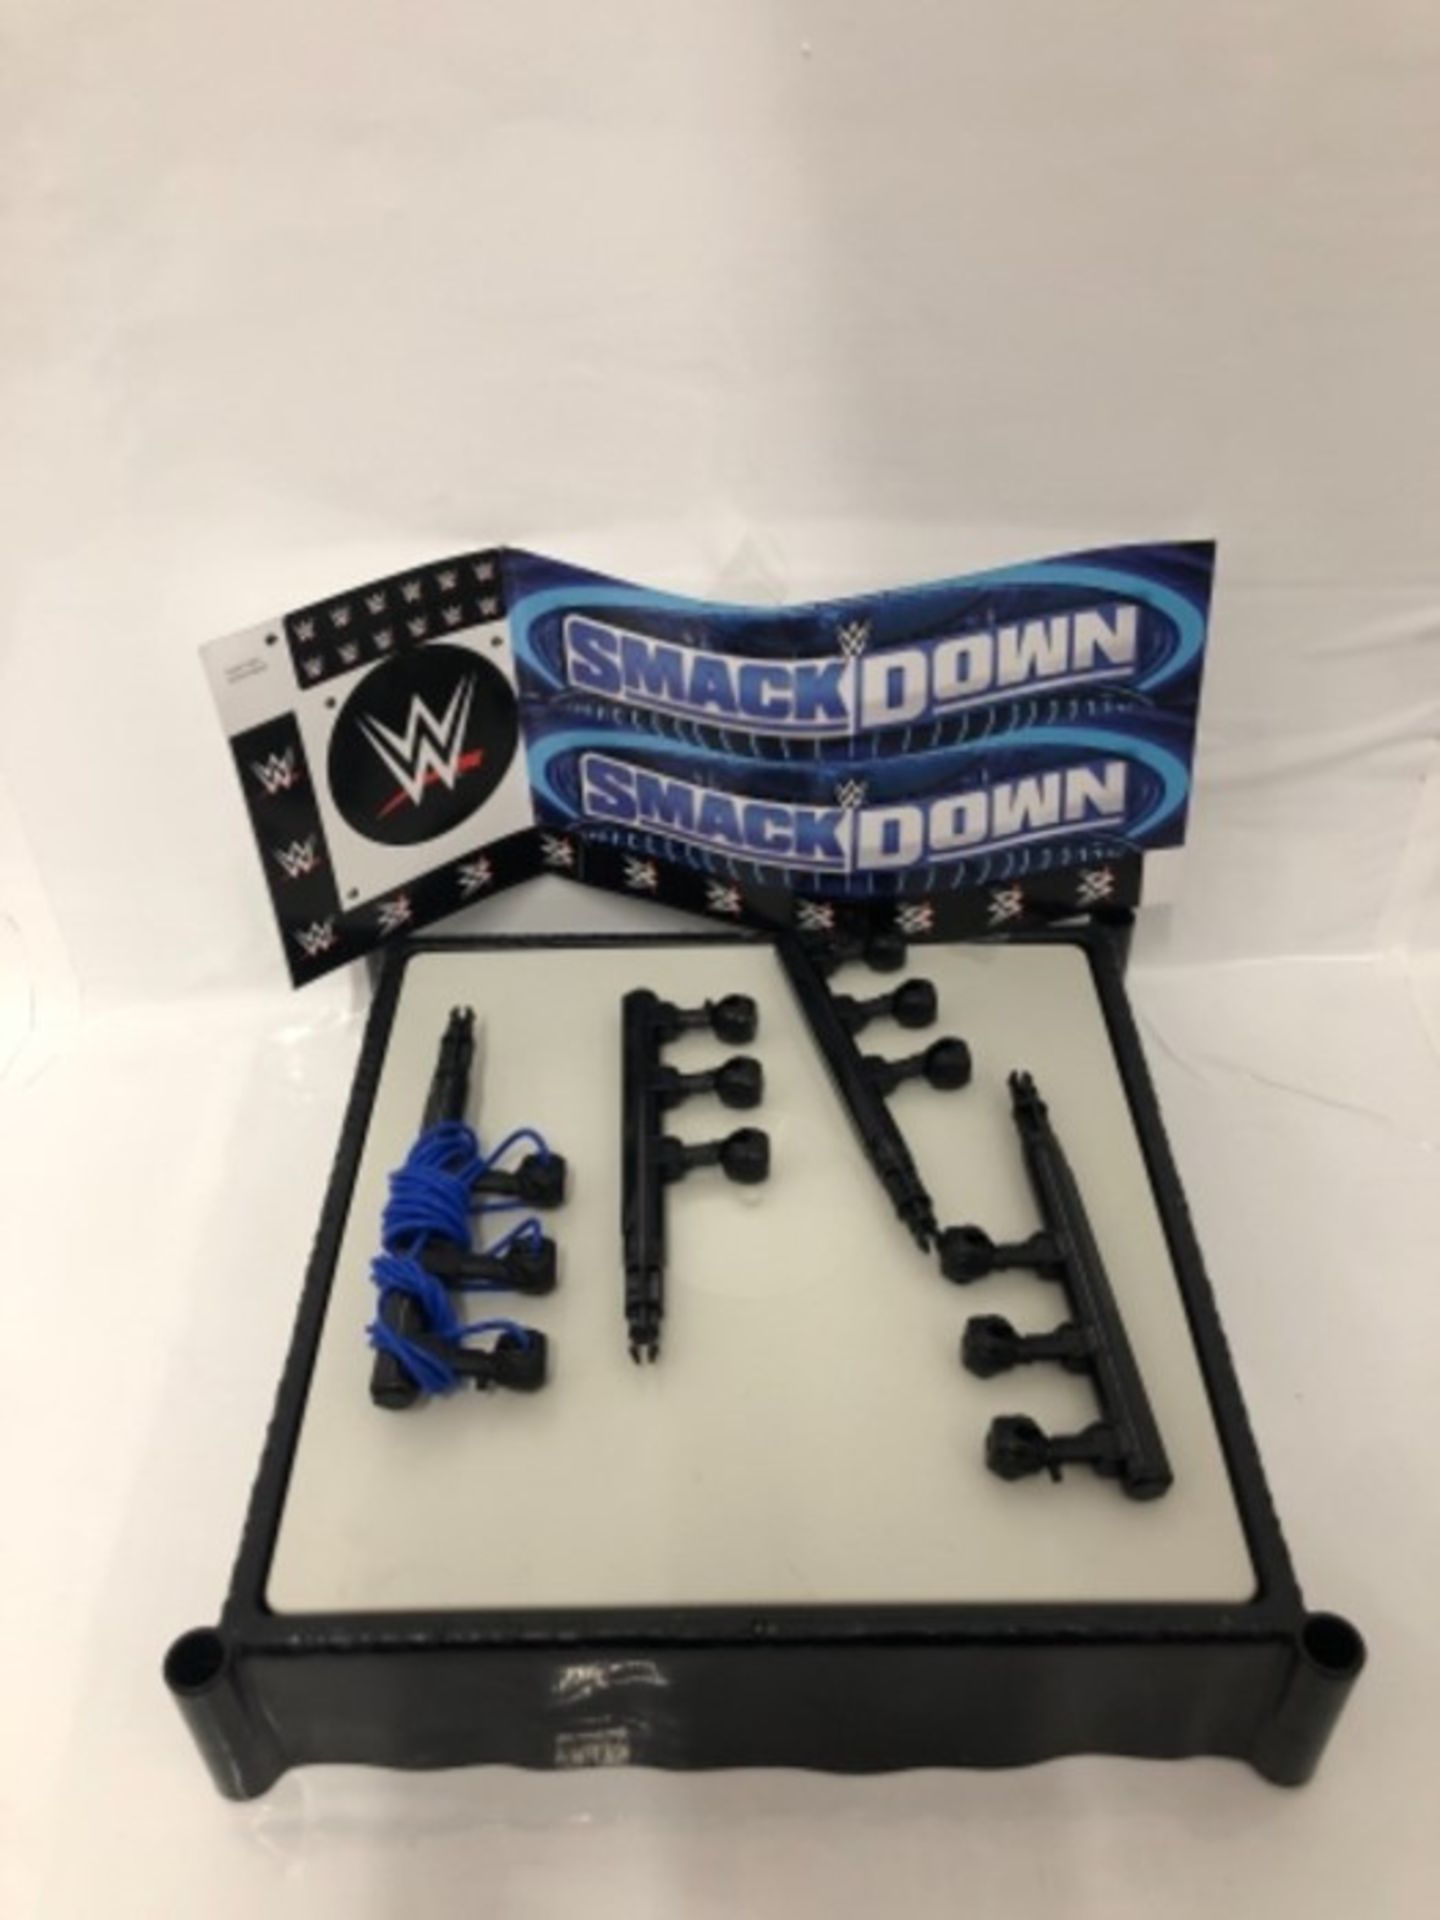 WWE Smackdown Superstar Ring - Image 3 of 3